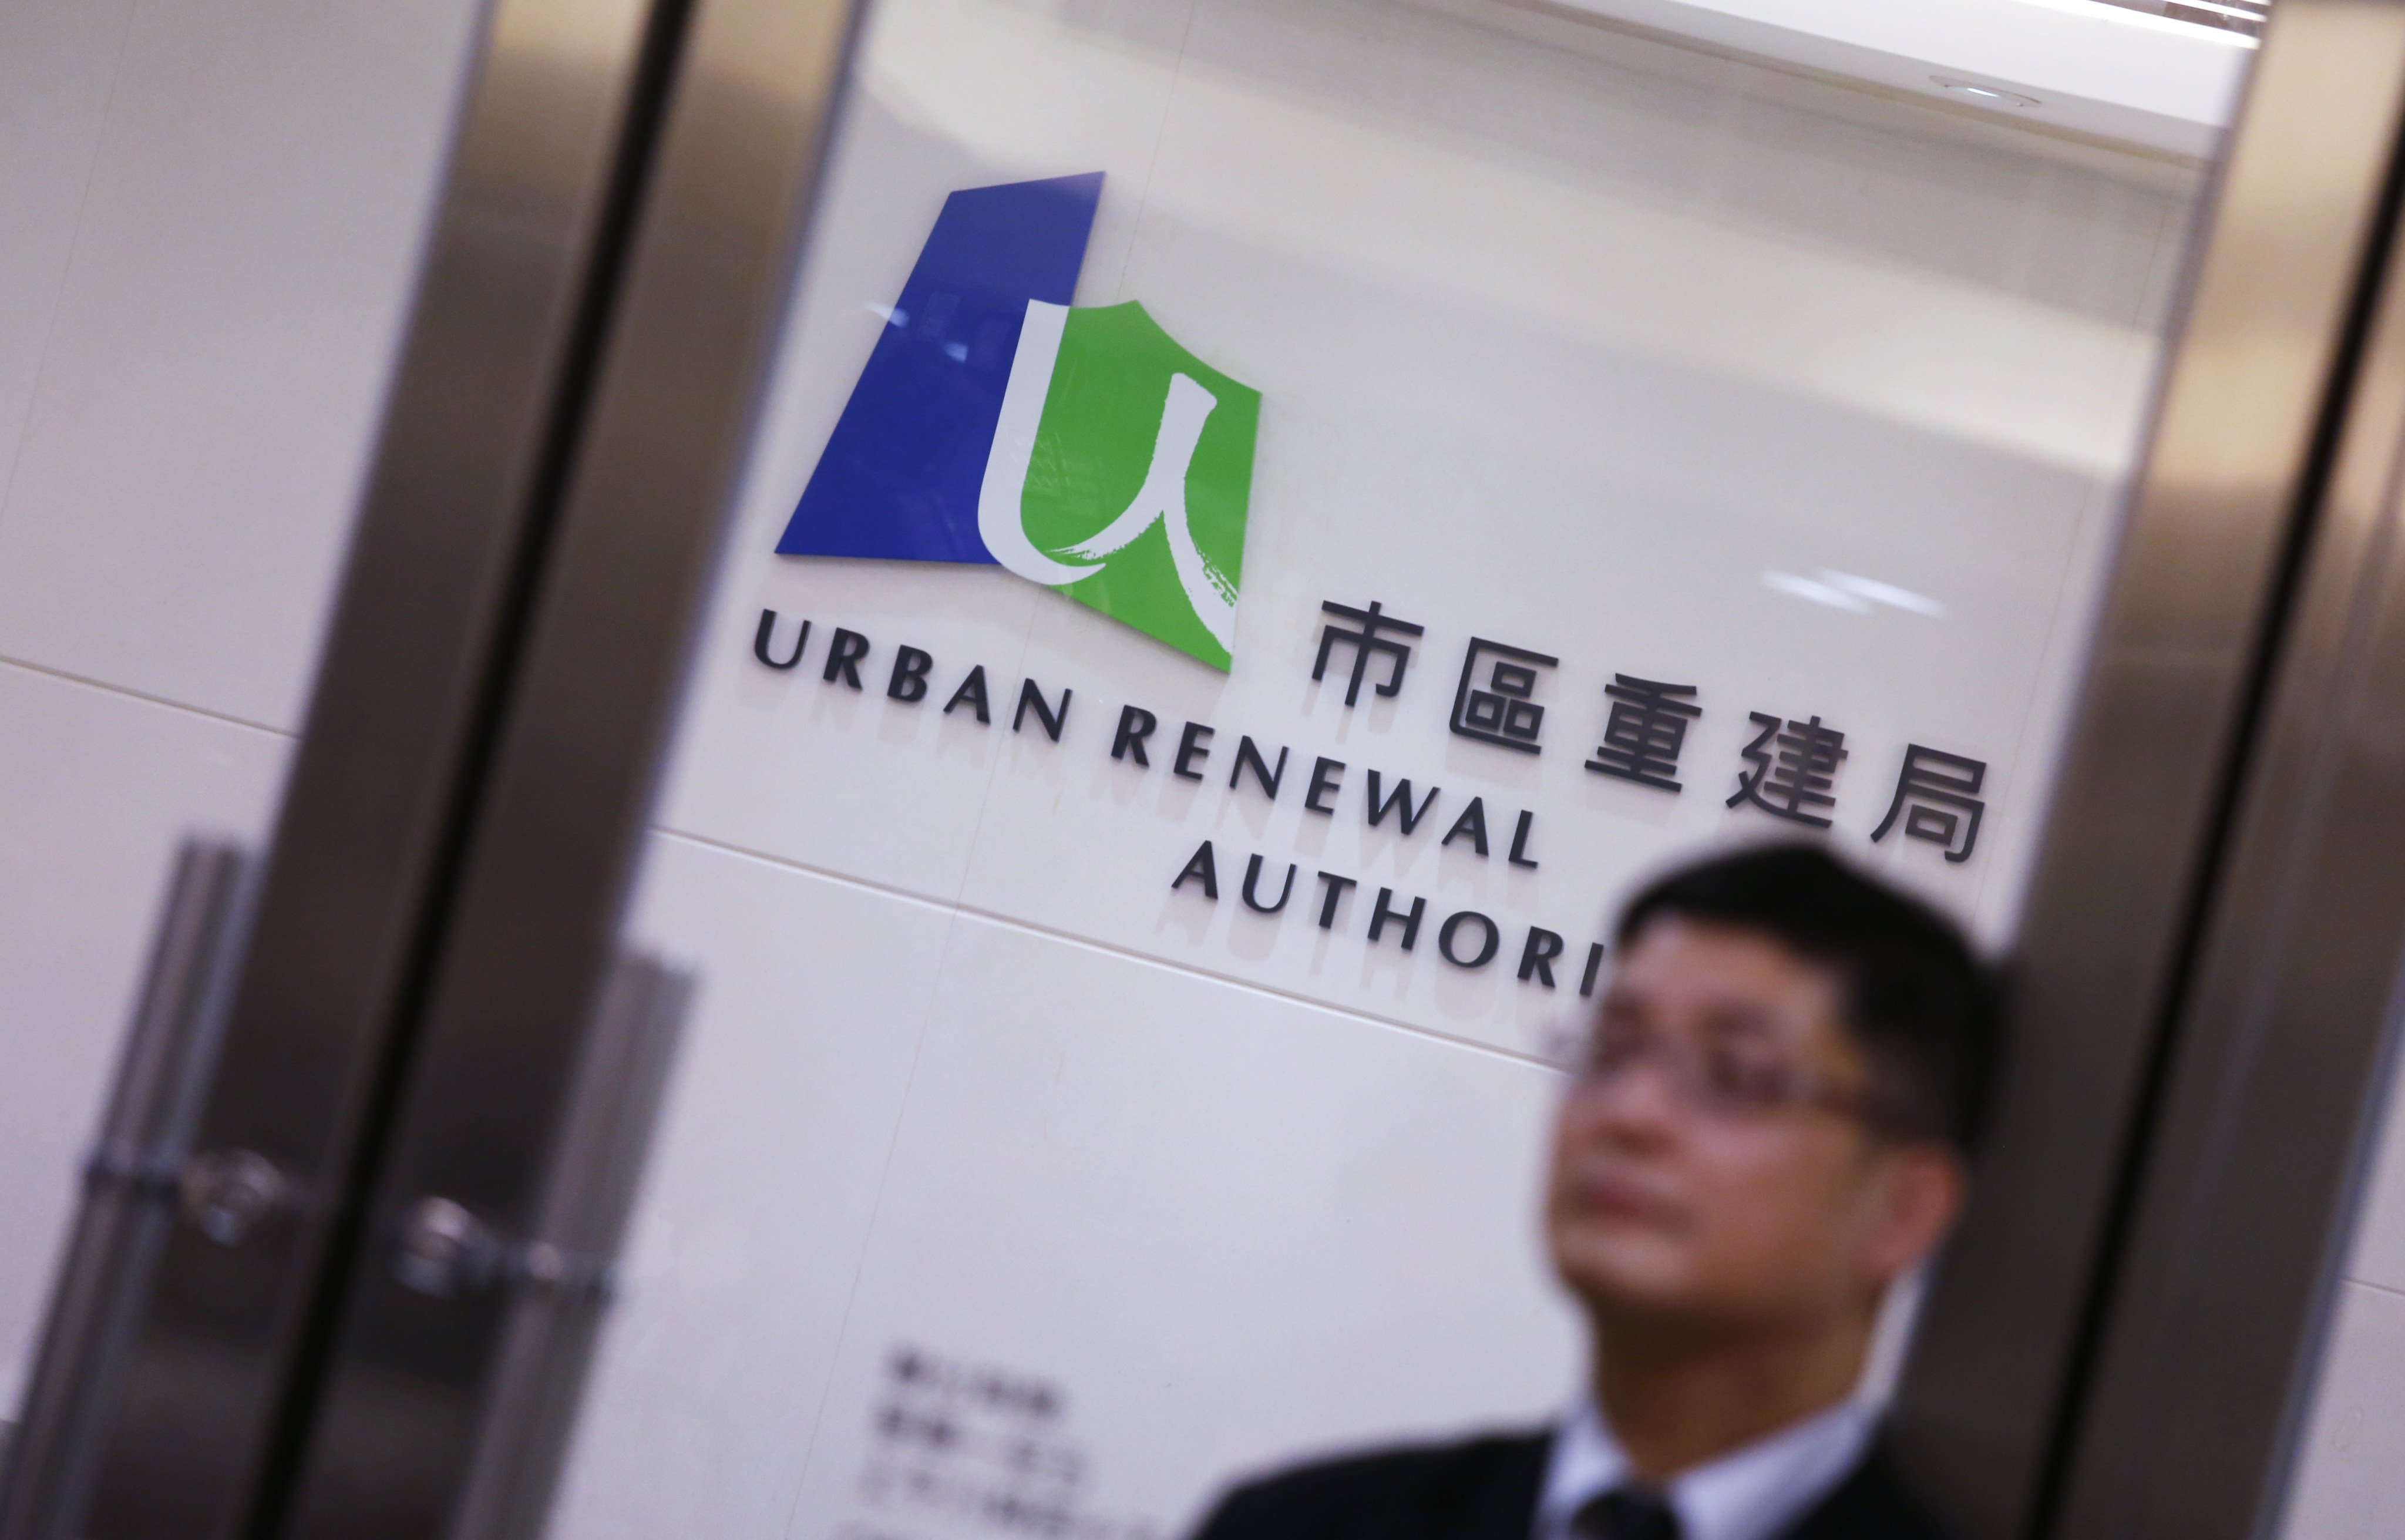 The Urban Renewal Authority last recorded a deficit in 2013-14. Photo: SCMP 